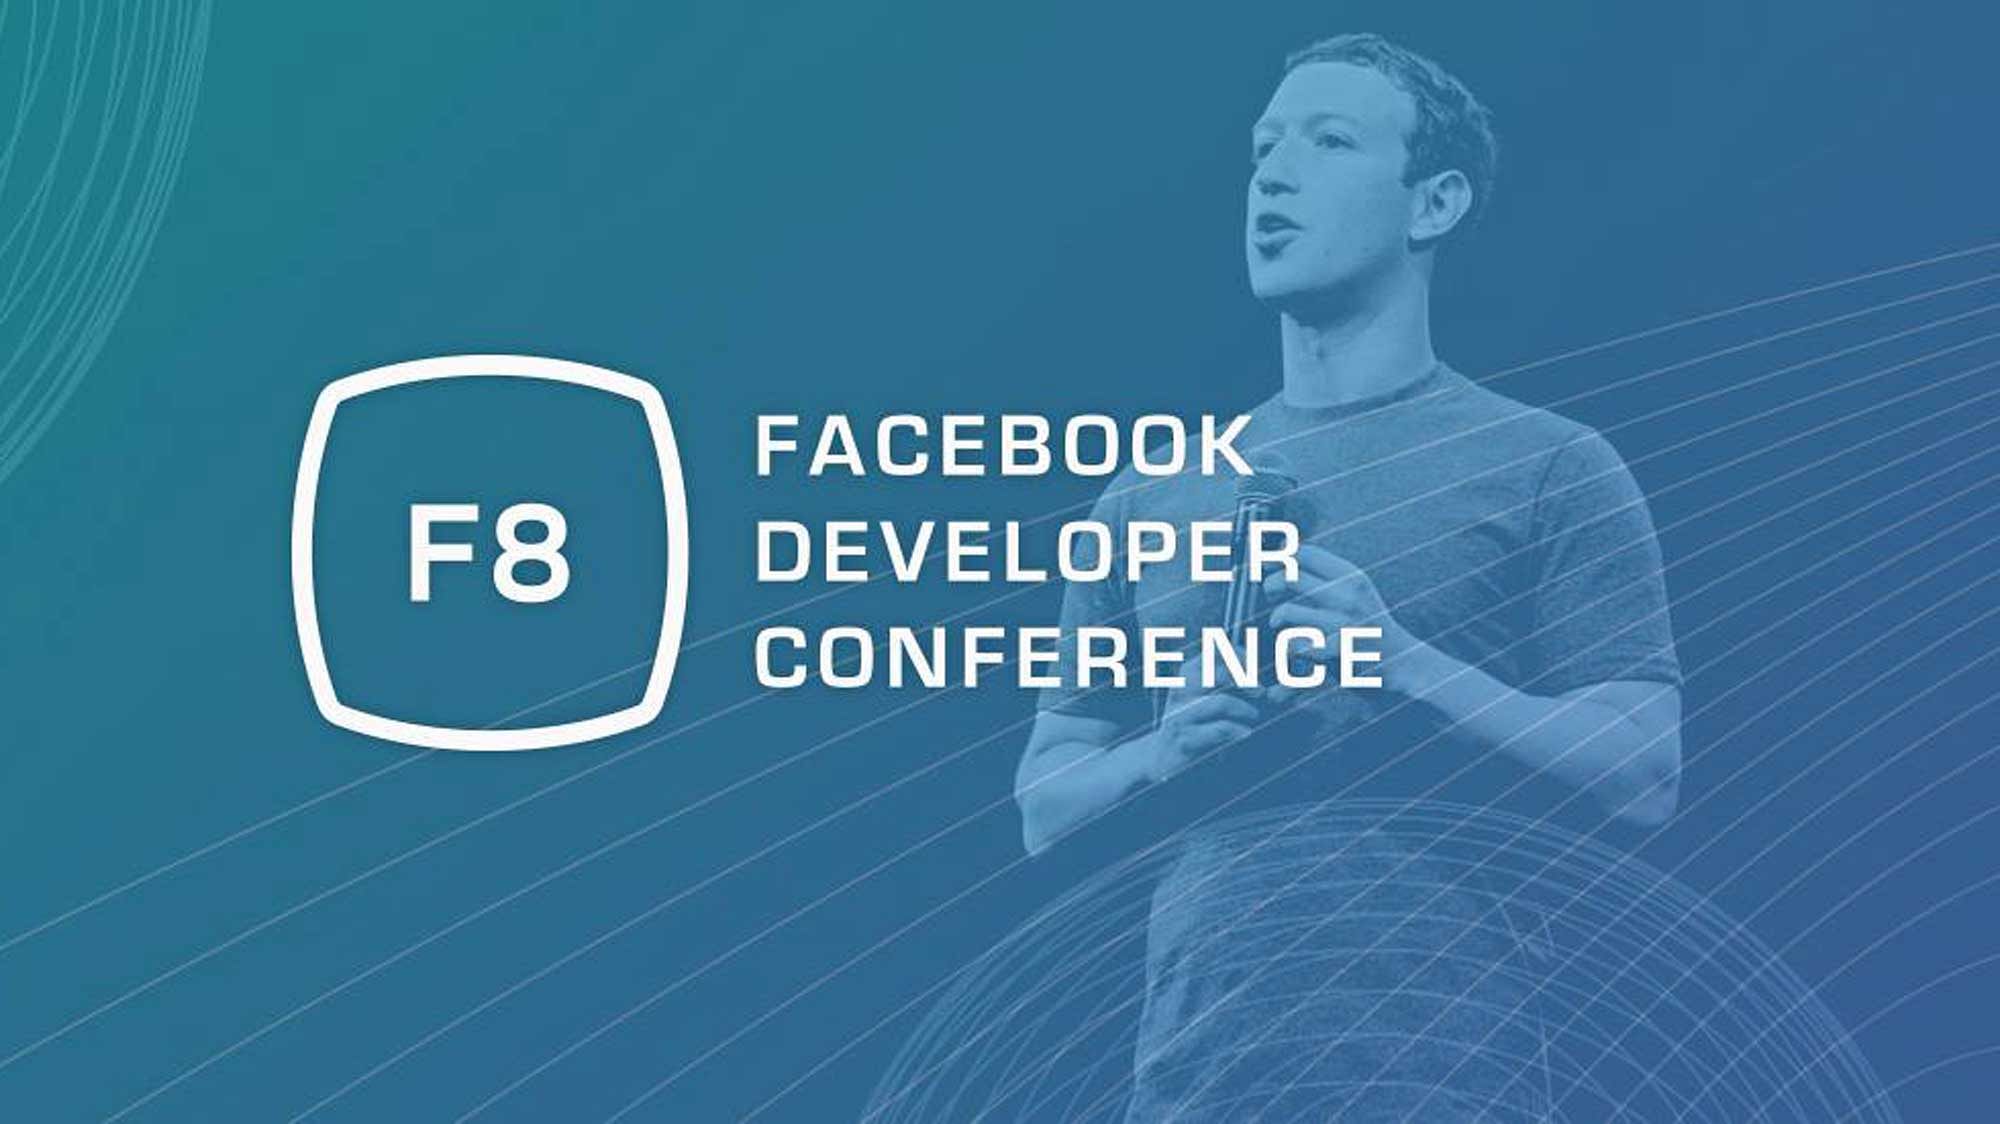 Facebook Developers Conference 2016. (Photo: <a href="https://www.facebook.com/FacebookforDevelopers/photos/a.10150835335273553.405490.19292868552/10153449192473553/?type=3&amp;theater">Facebook</a>)